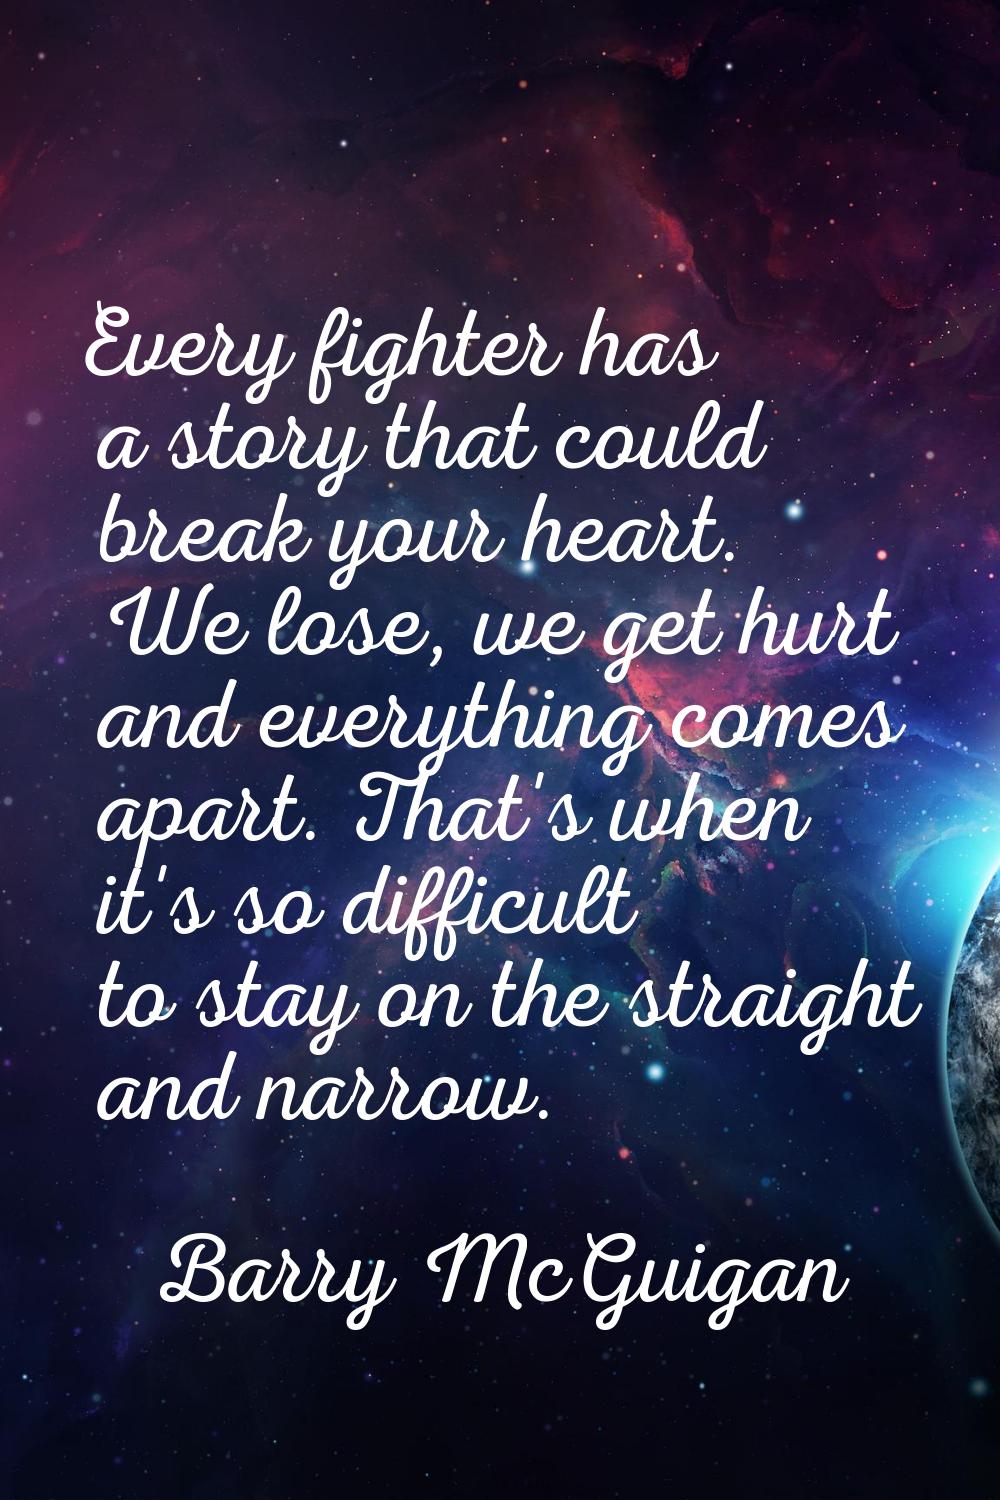 Every fighter has a story that could break your heart. We lose, we get hurt and everything comes ap